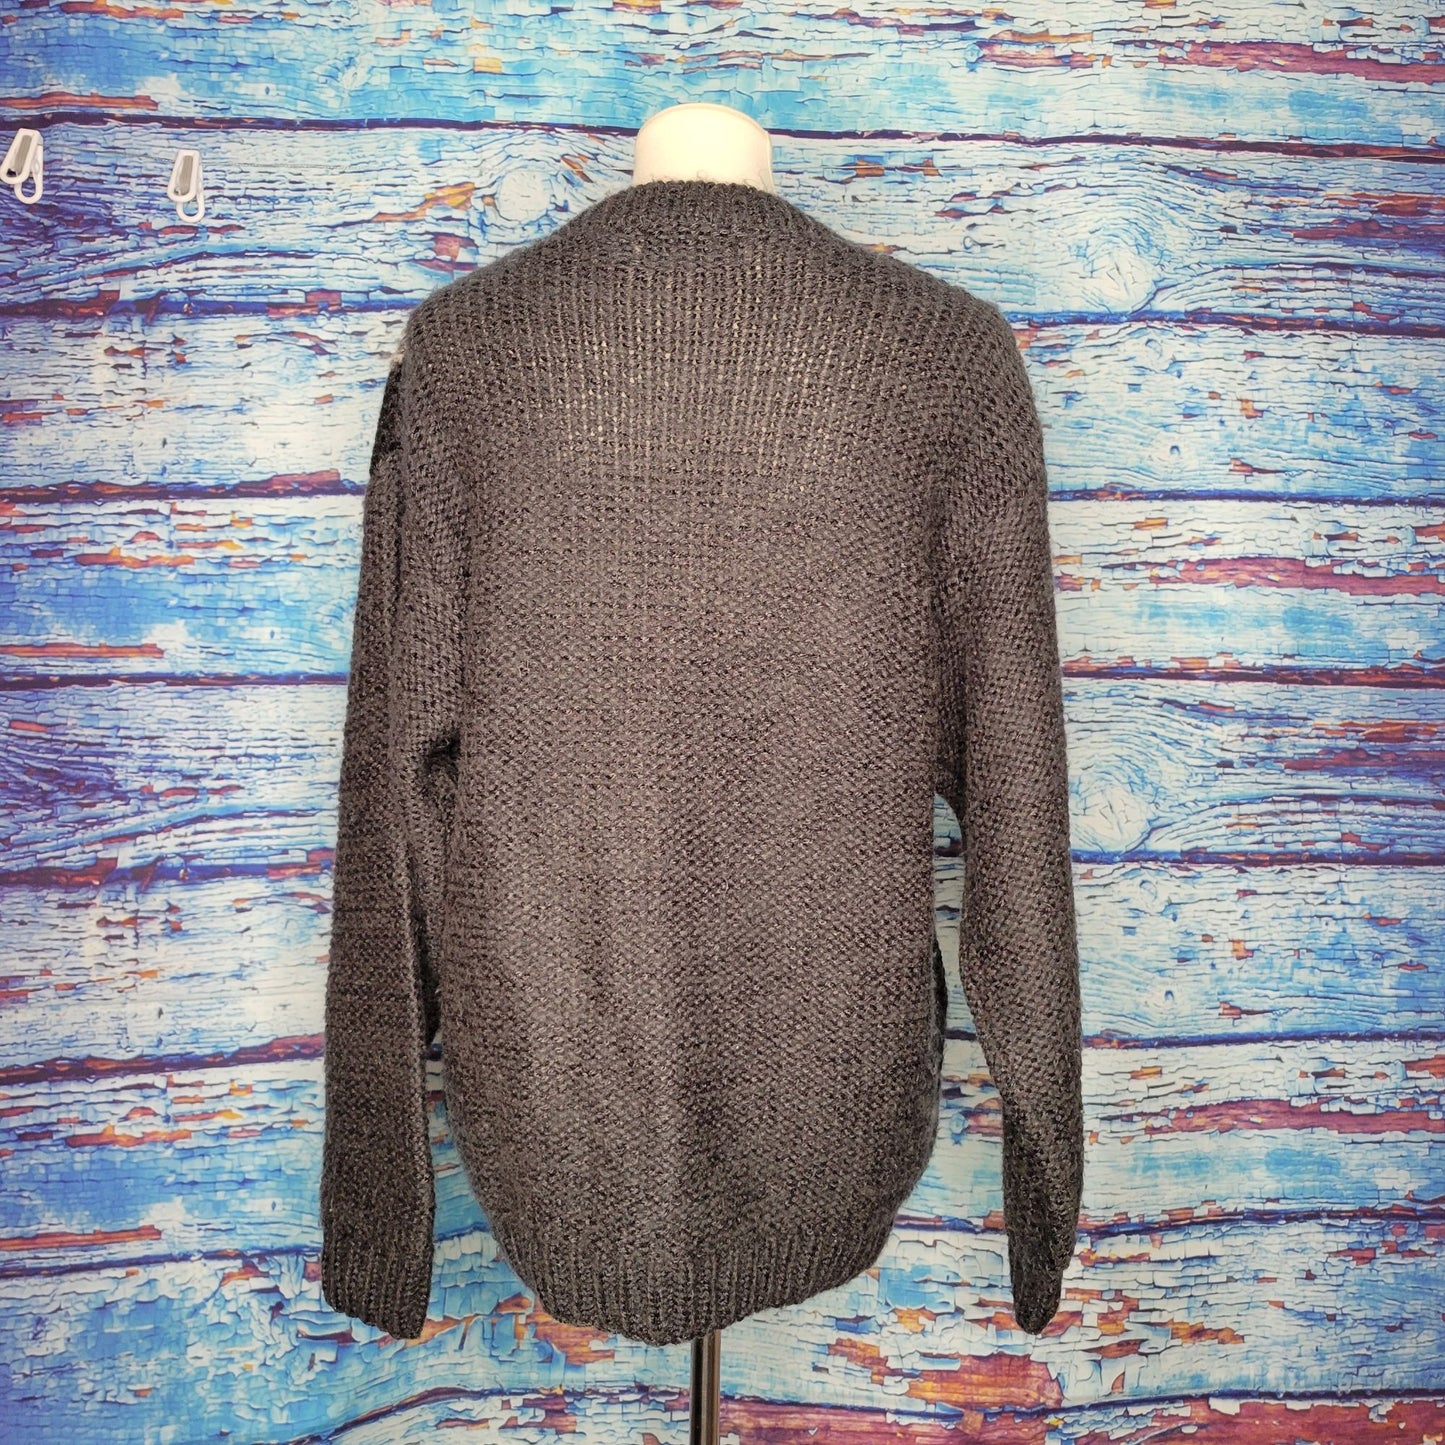 Vintage 80's 90's Grandpa Button Up Sweater Cardigan by Street Scenes